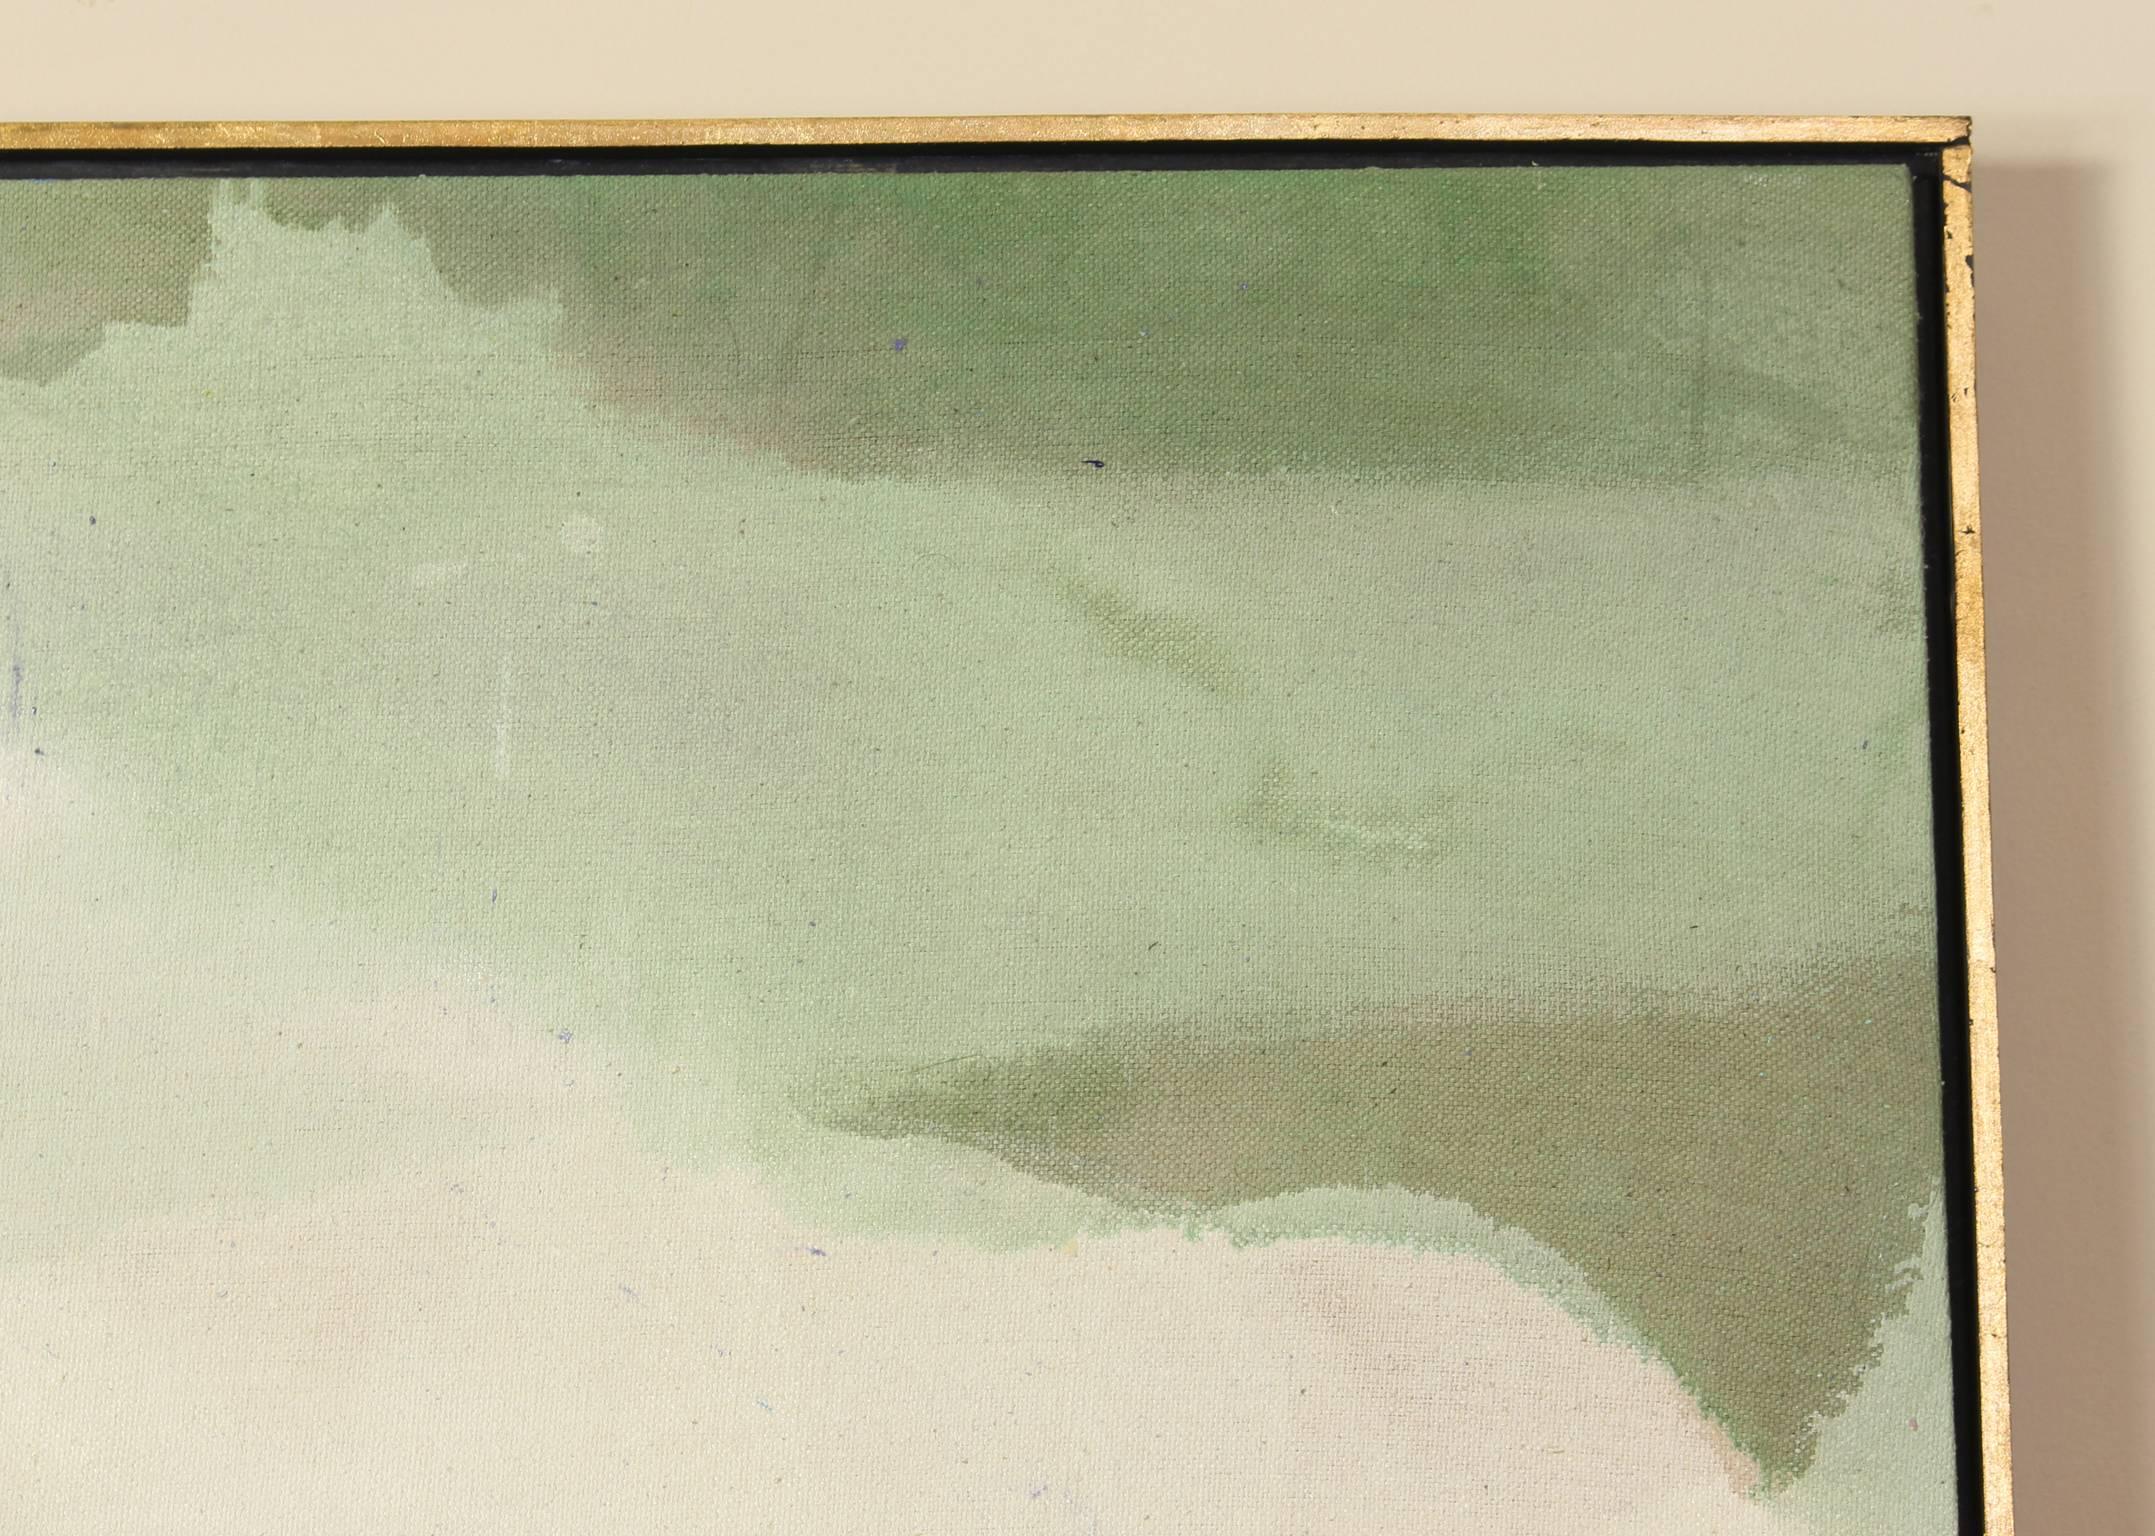 A large and dramatic abstract painting by noted Washington DC artist David Bell in a palette of soft greens blues and grey set in a simple giltwood shadow box frame.